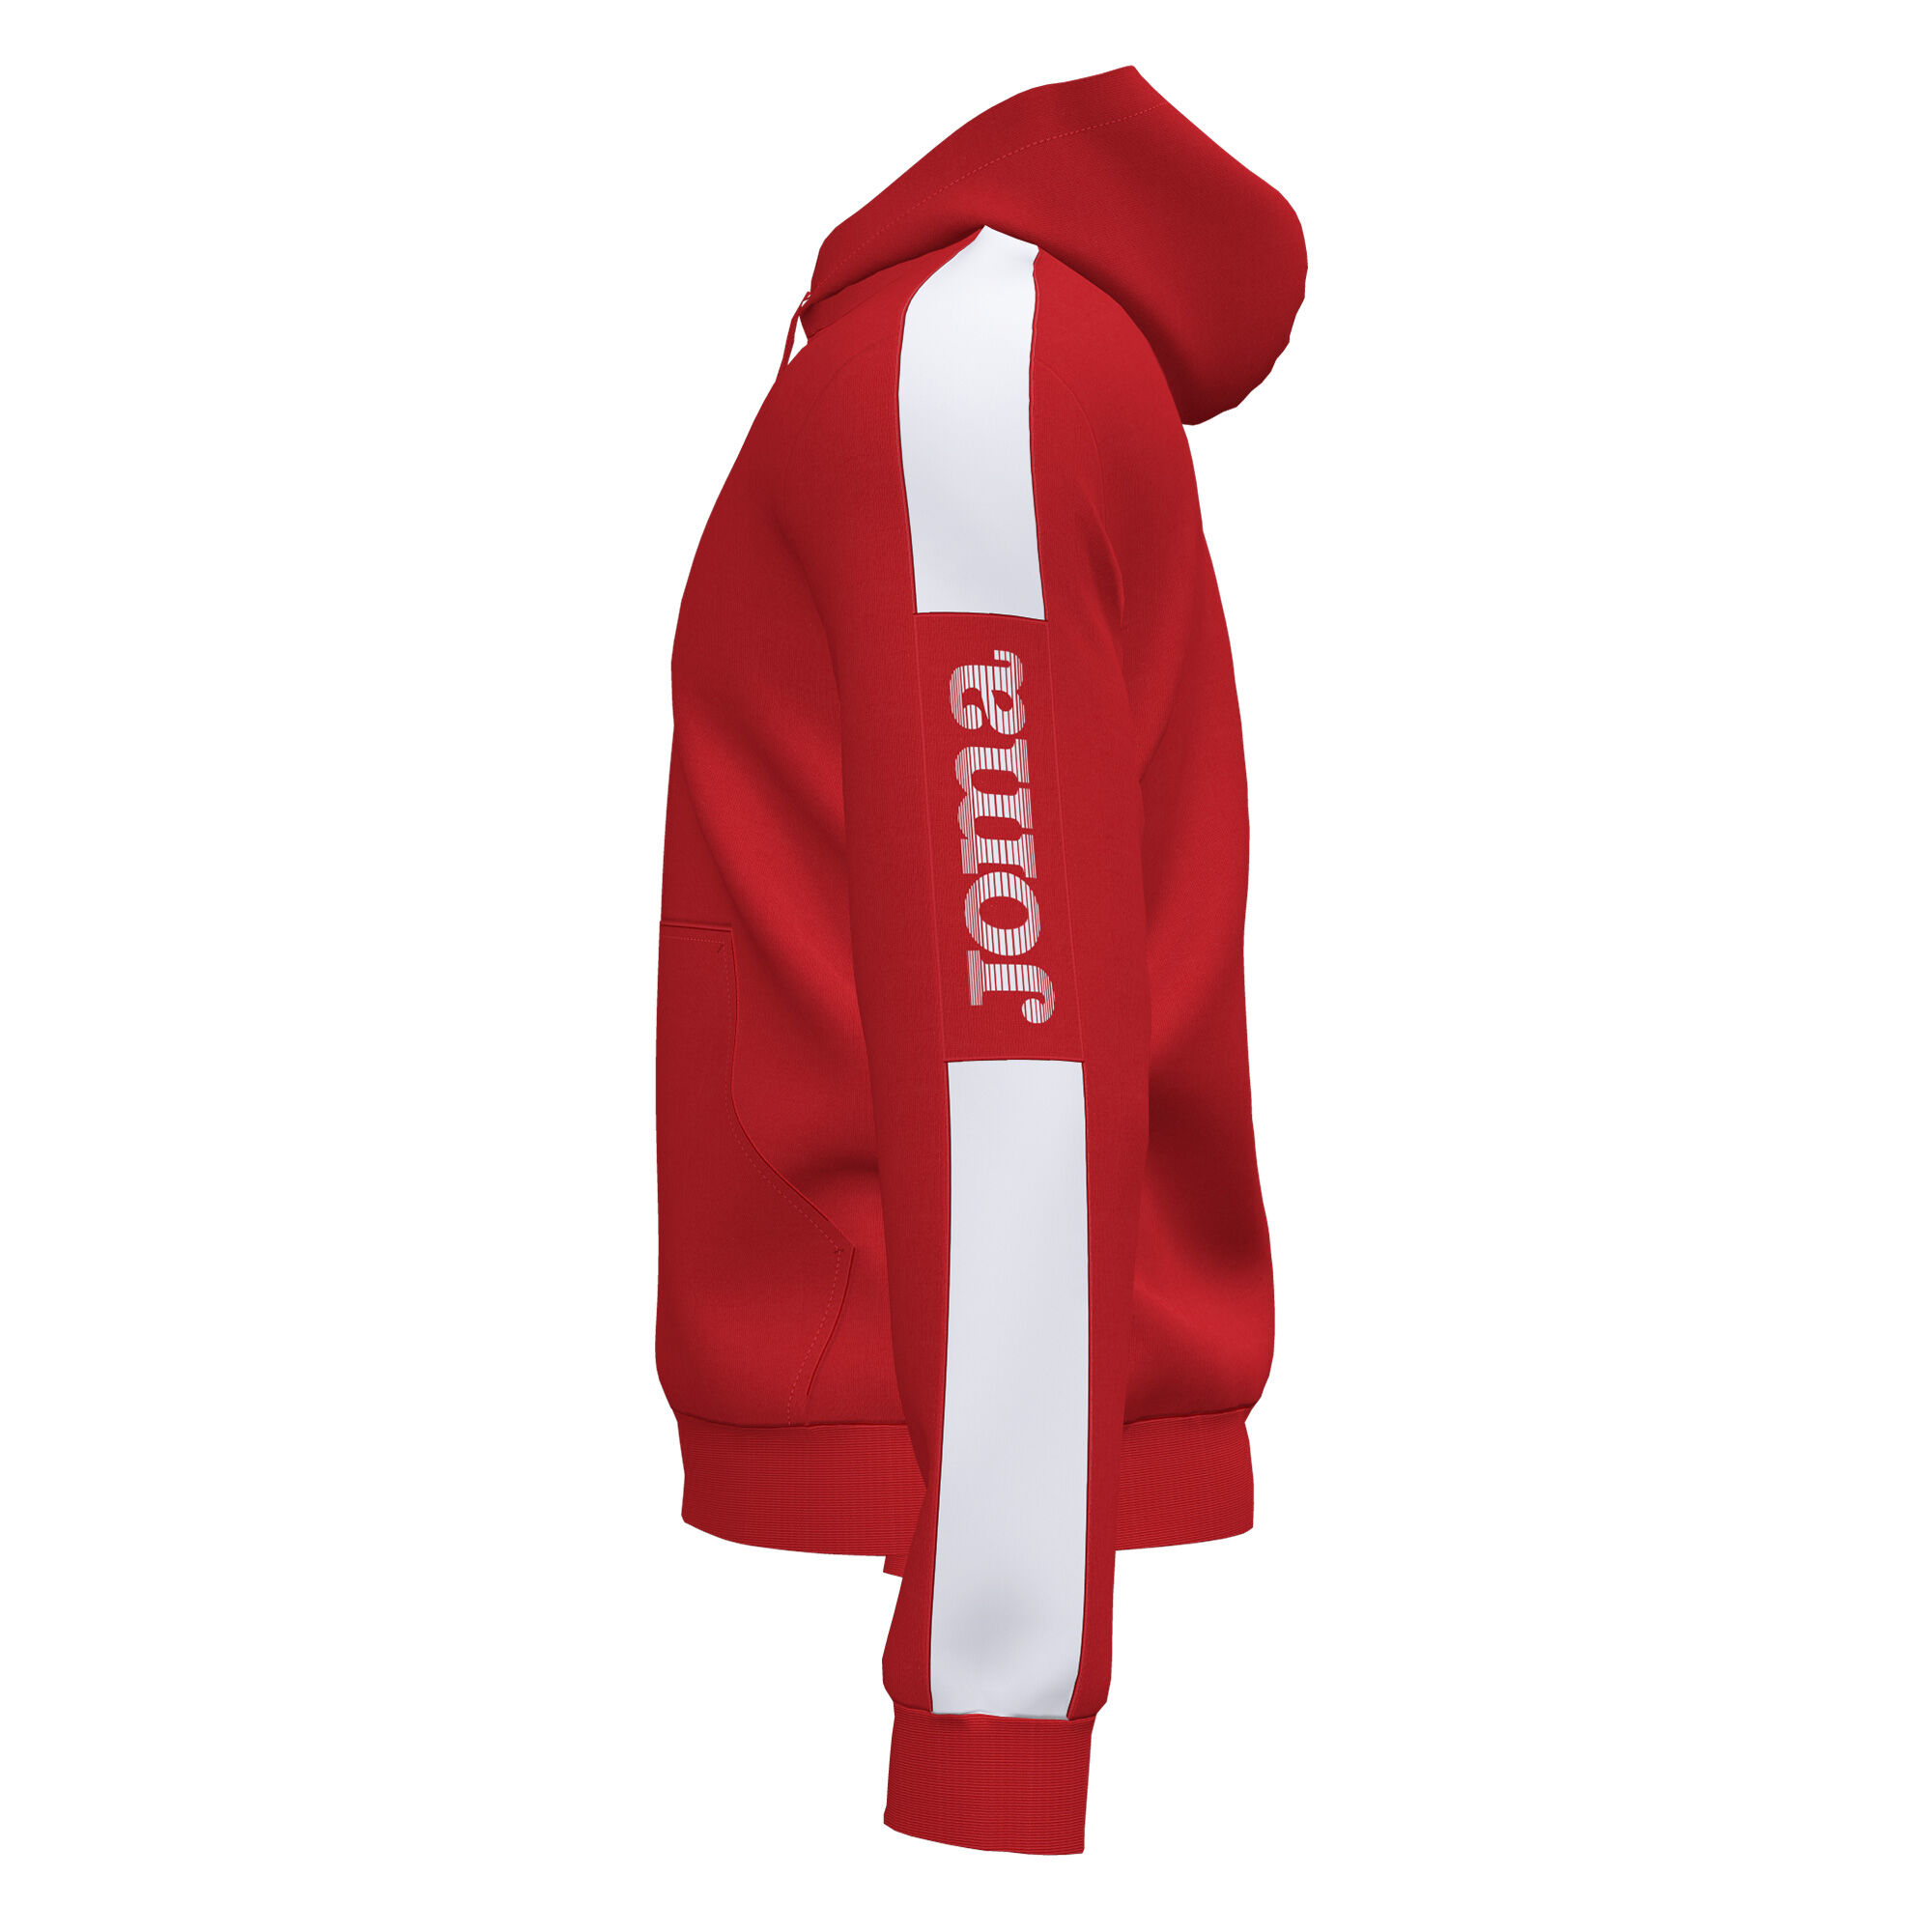 Hooded sweater man Championship IV red white